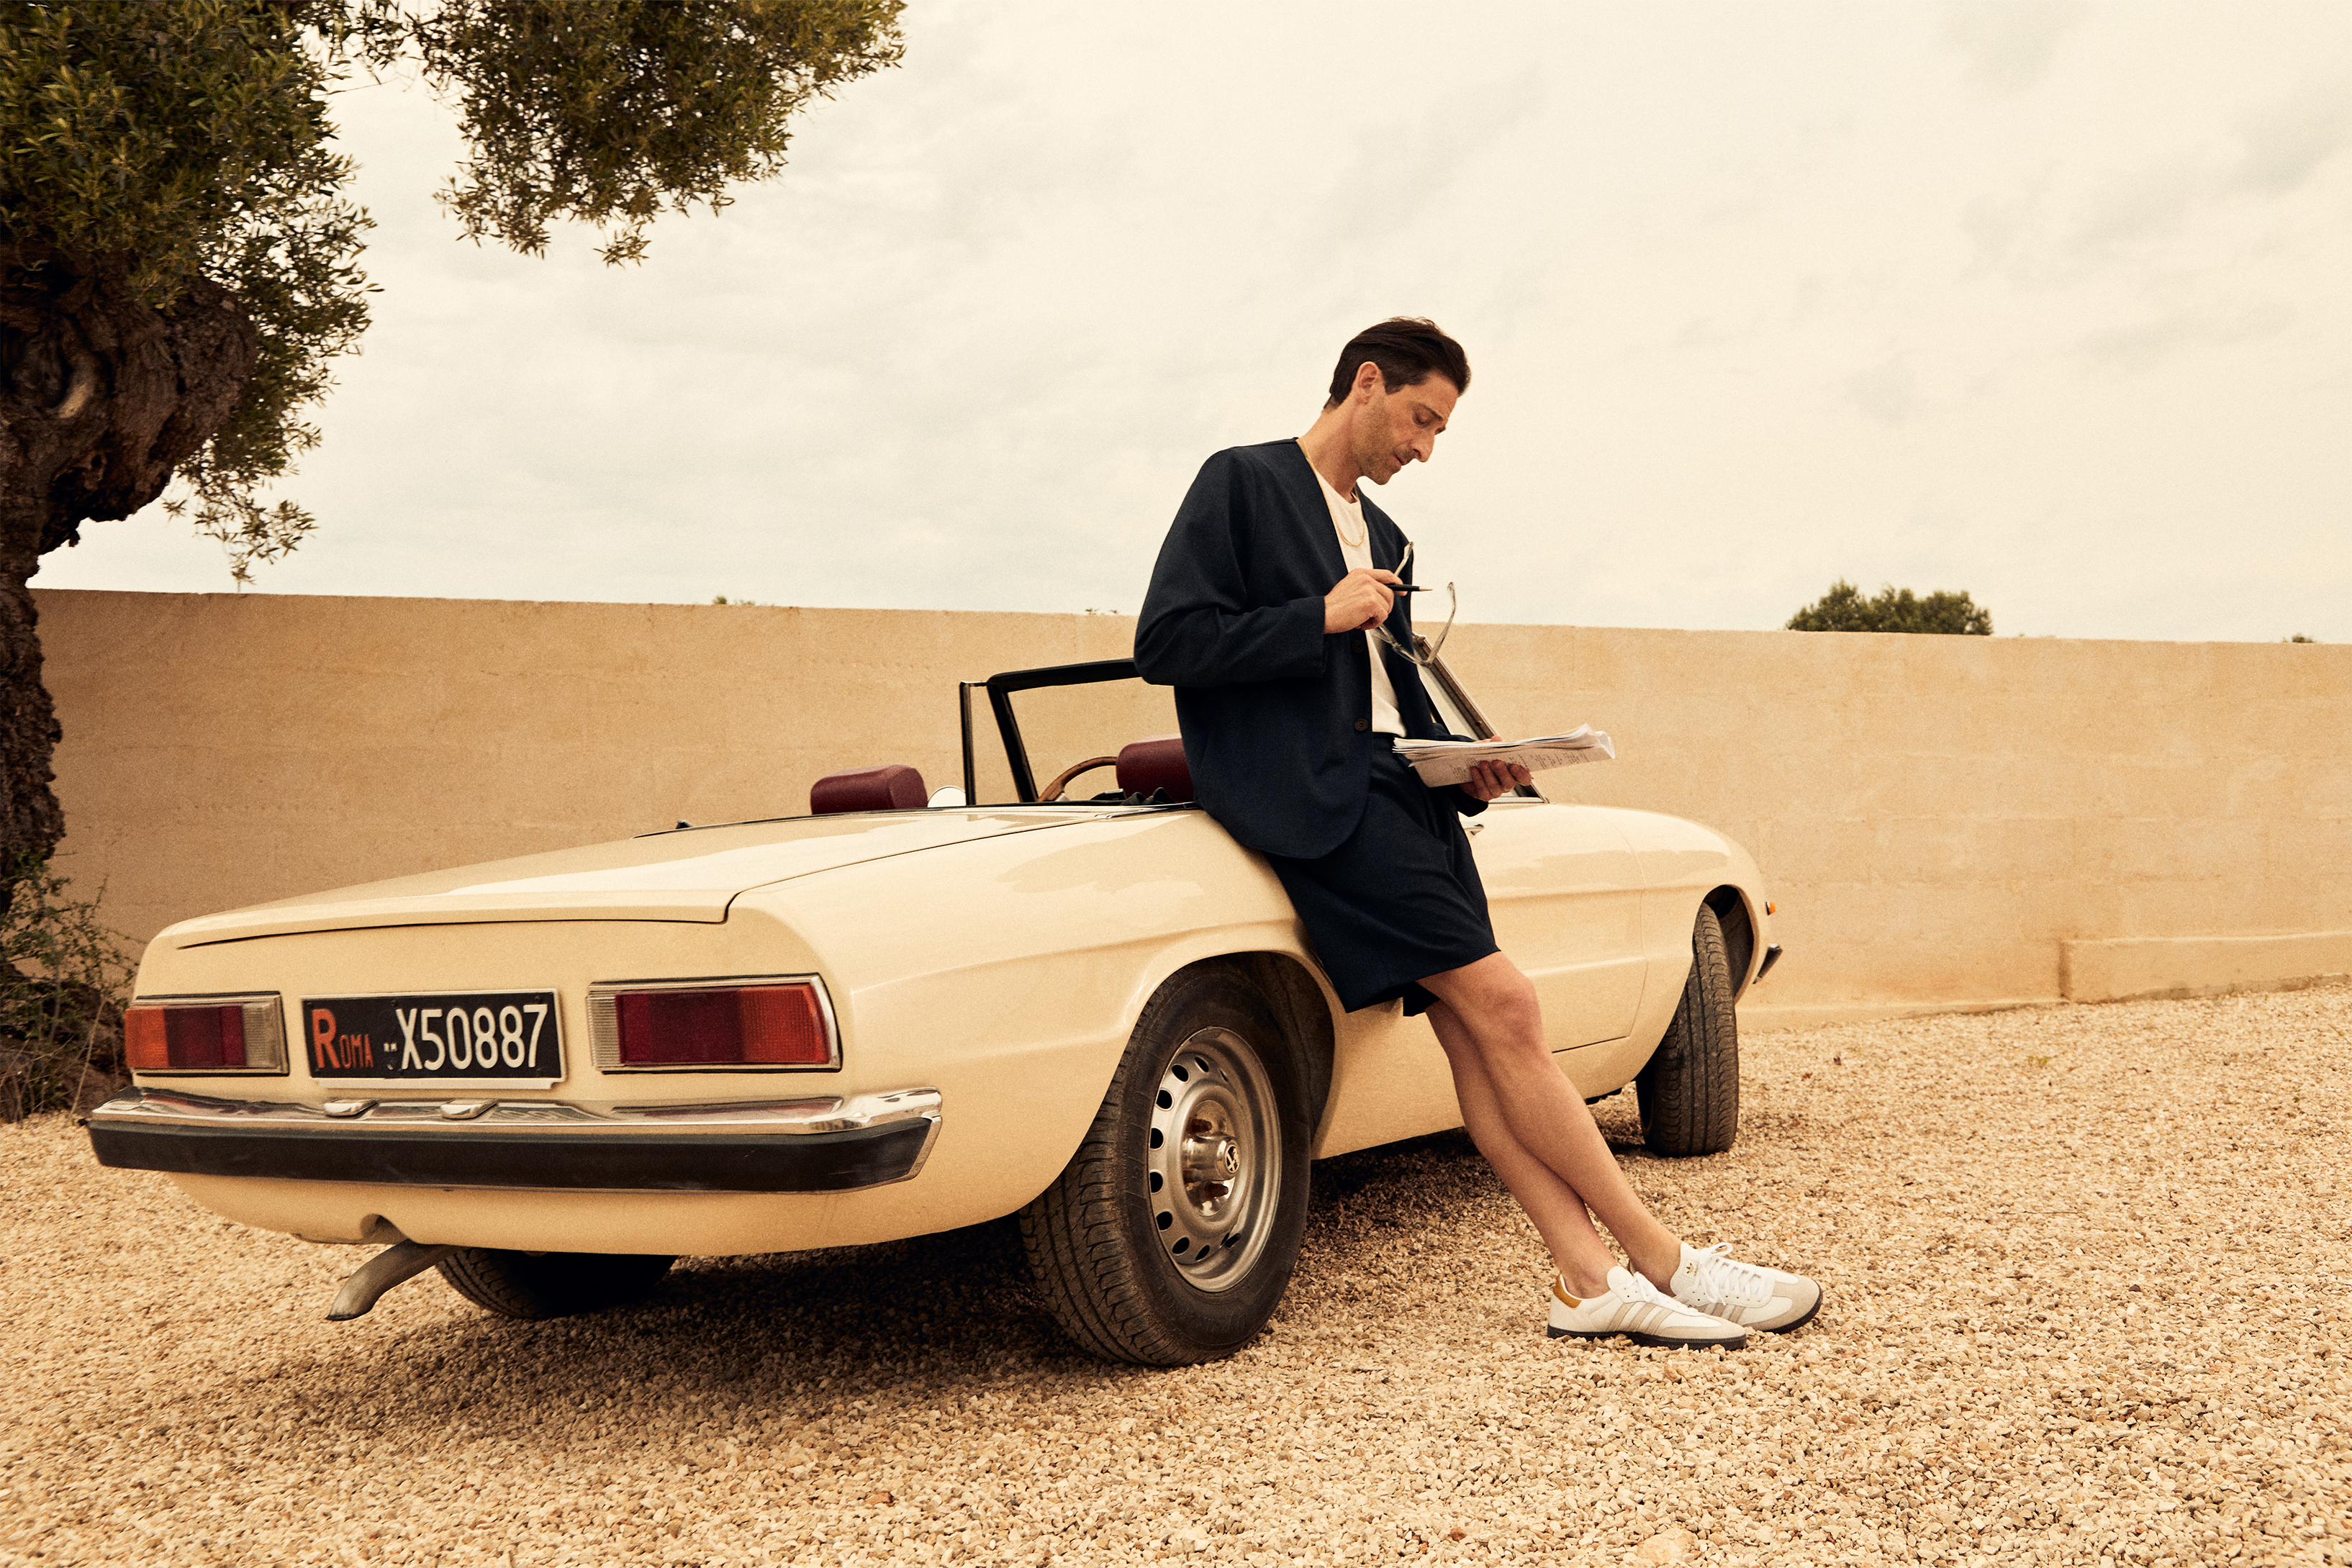 Adrian Brody leaning against a car in Kith clothing